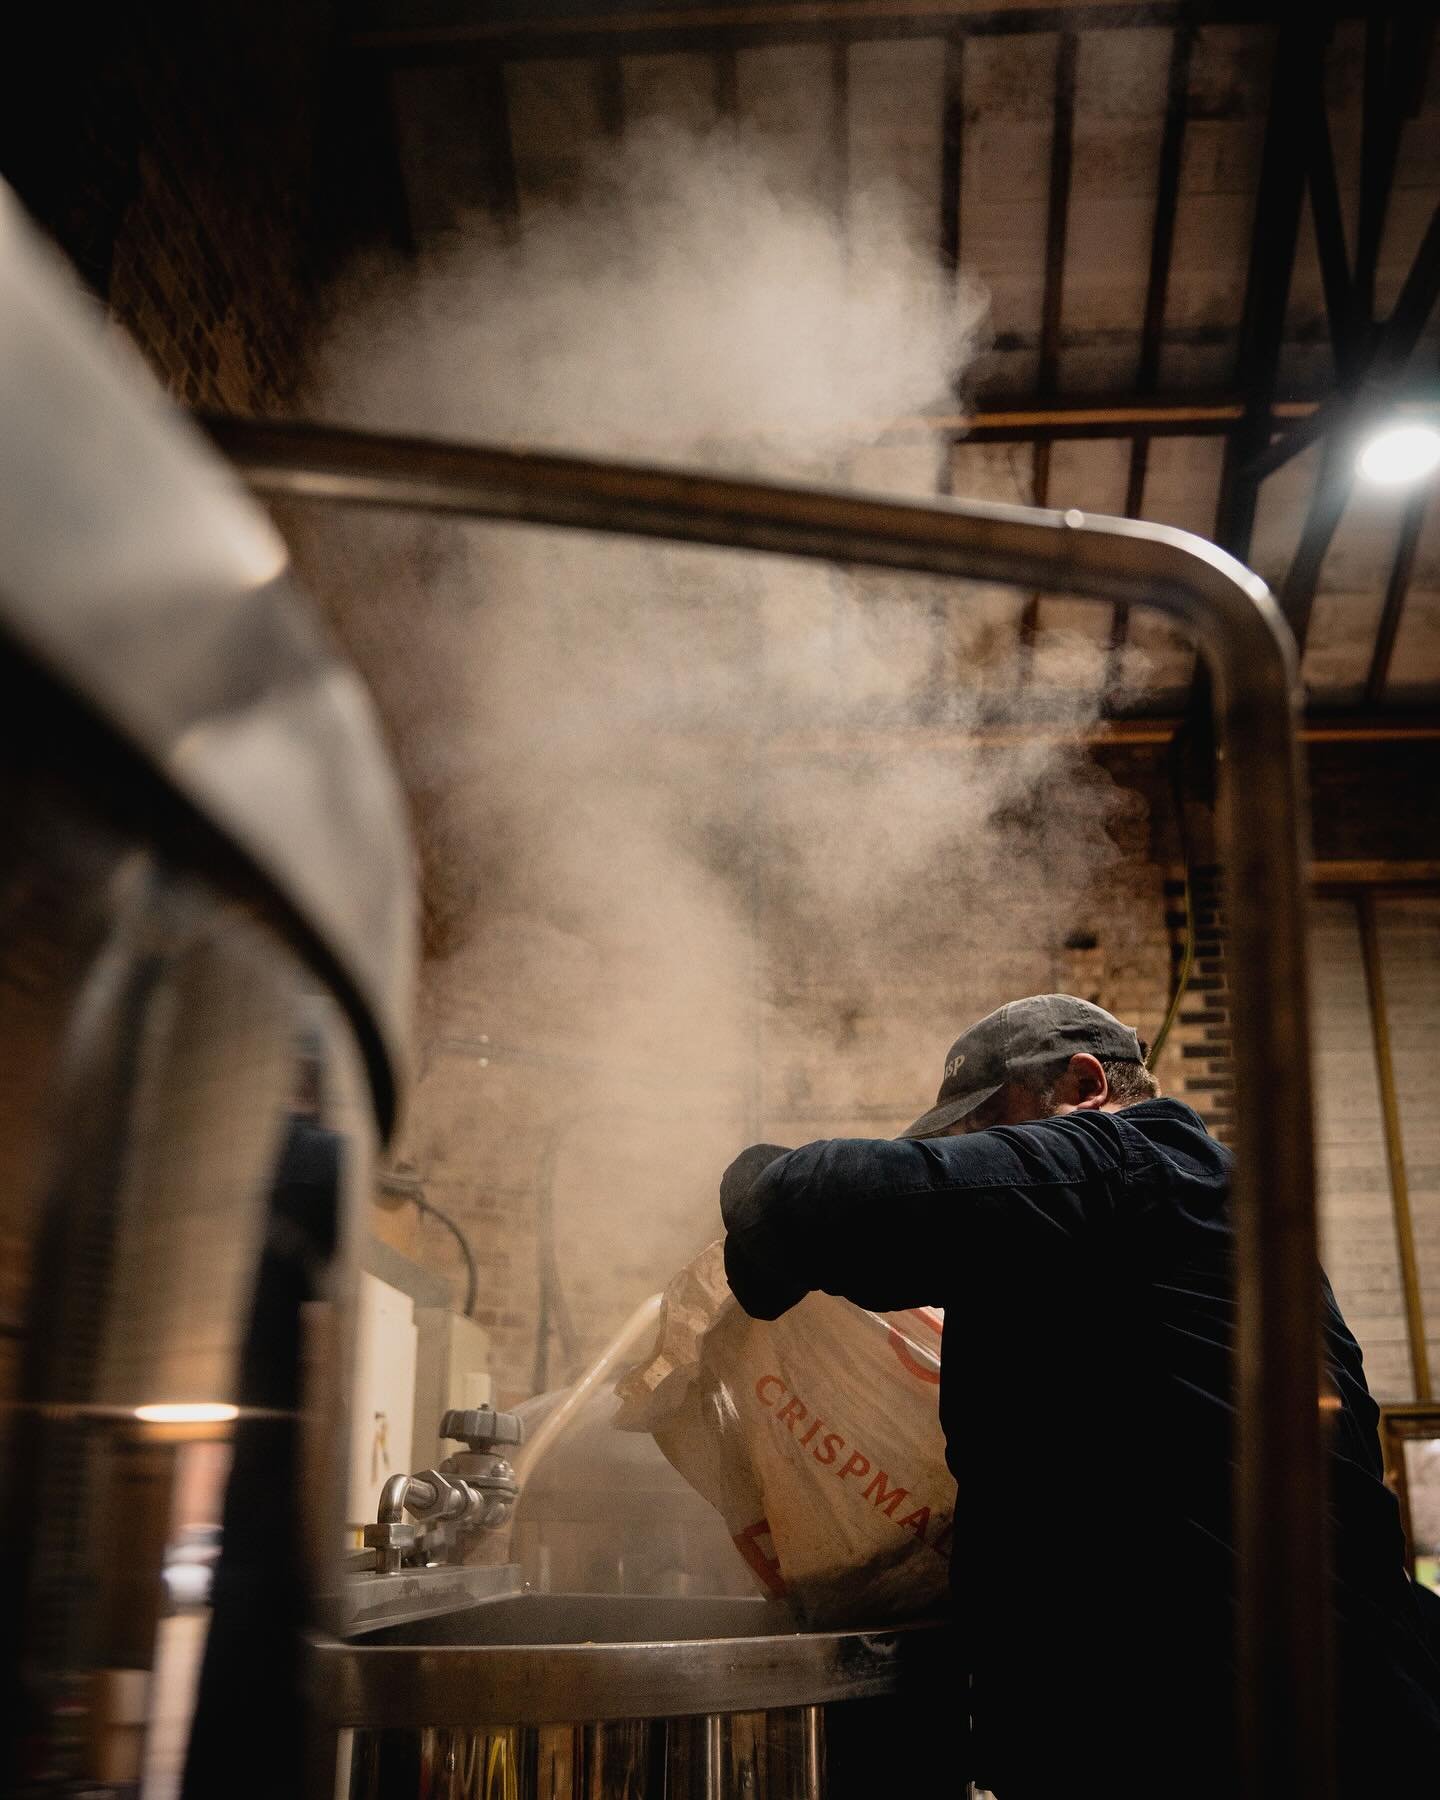 This week, I got to capture some behind-the-scenes photos of the team at @barshambrewery in action. It was a great experience to do something different, and gain a little insight into the brewery operations. It was great to see the passion that goes 